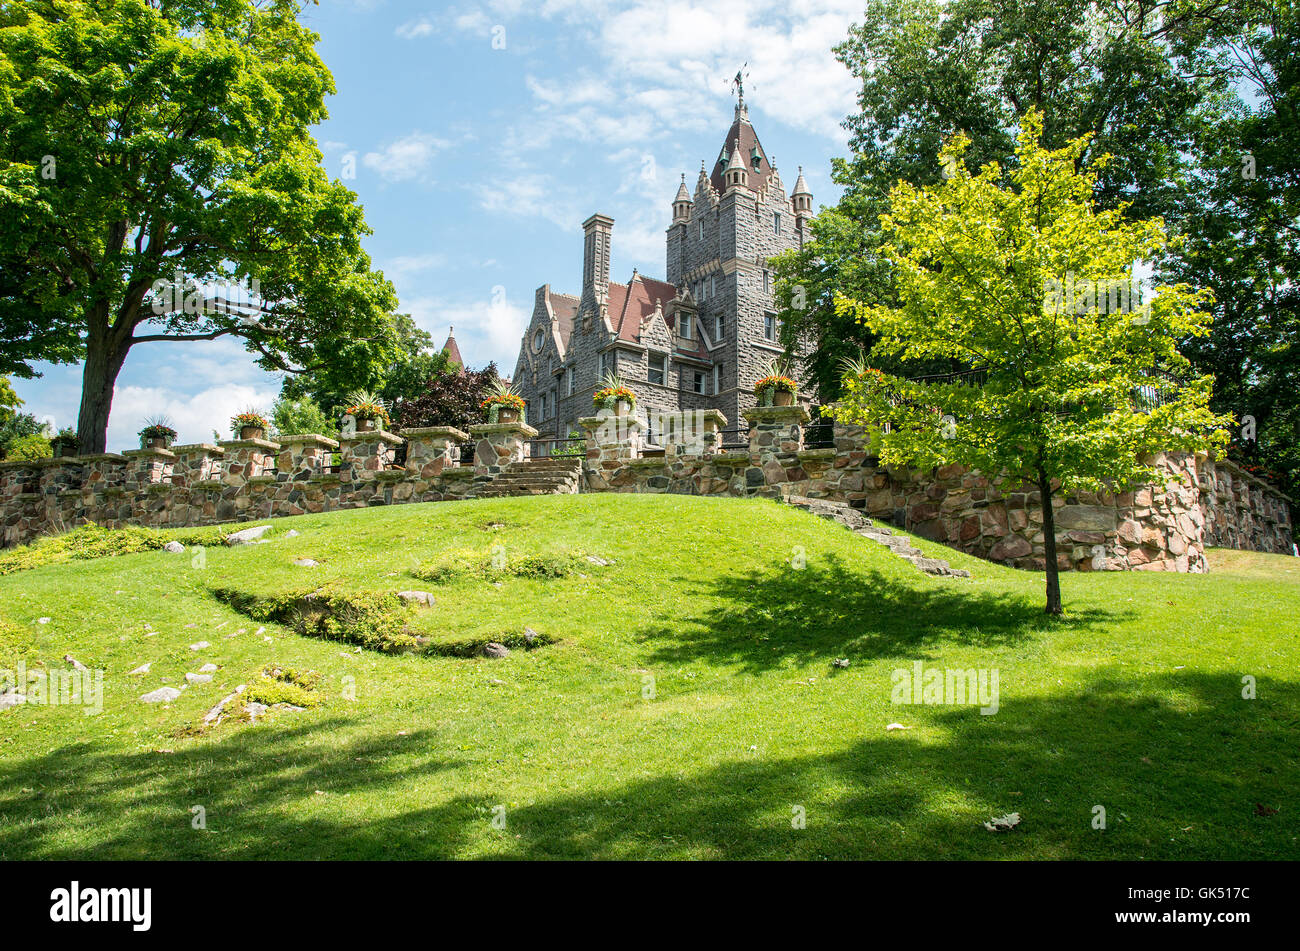 Boldt Castle on Heart Island in the St Lawrence River Stock Photo